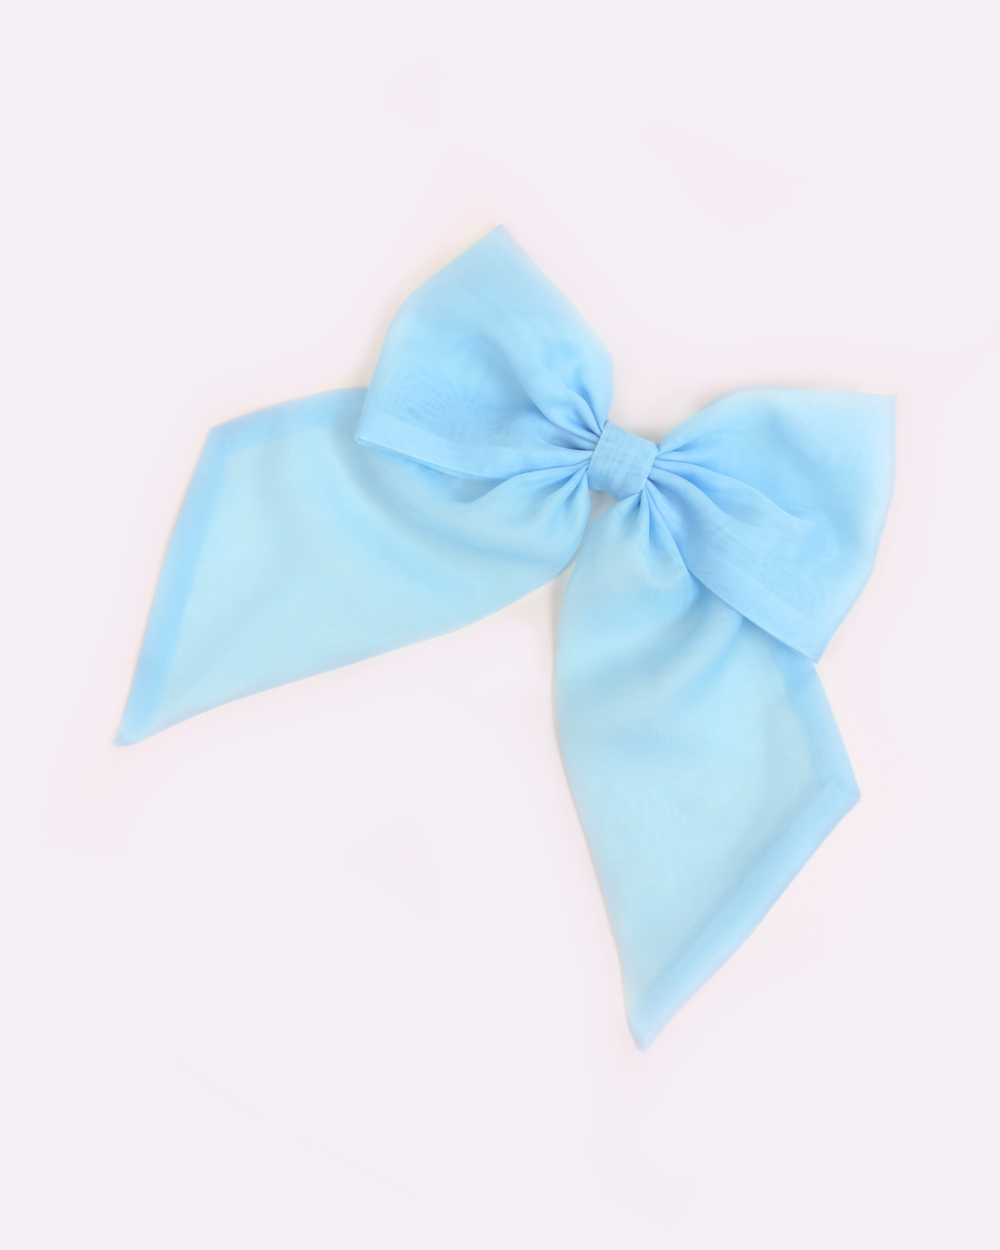 Blue brooch in the shape of a giant bow made of voile by melikestea.